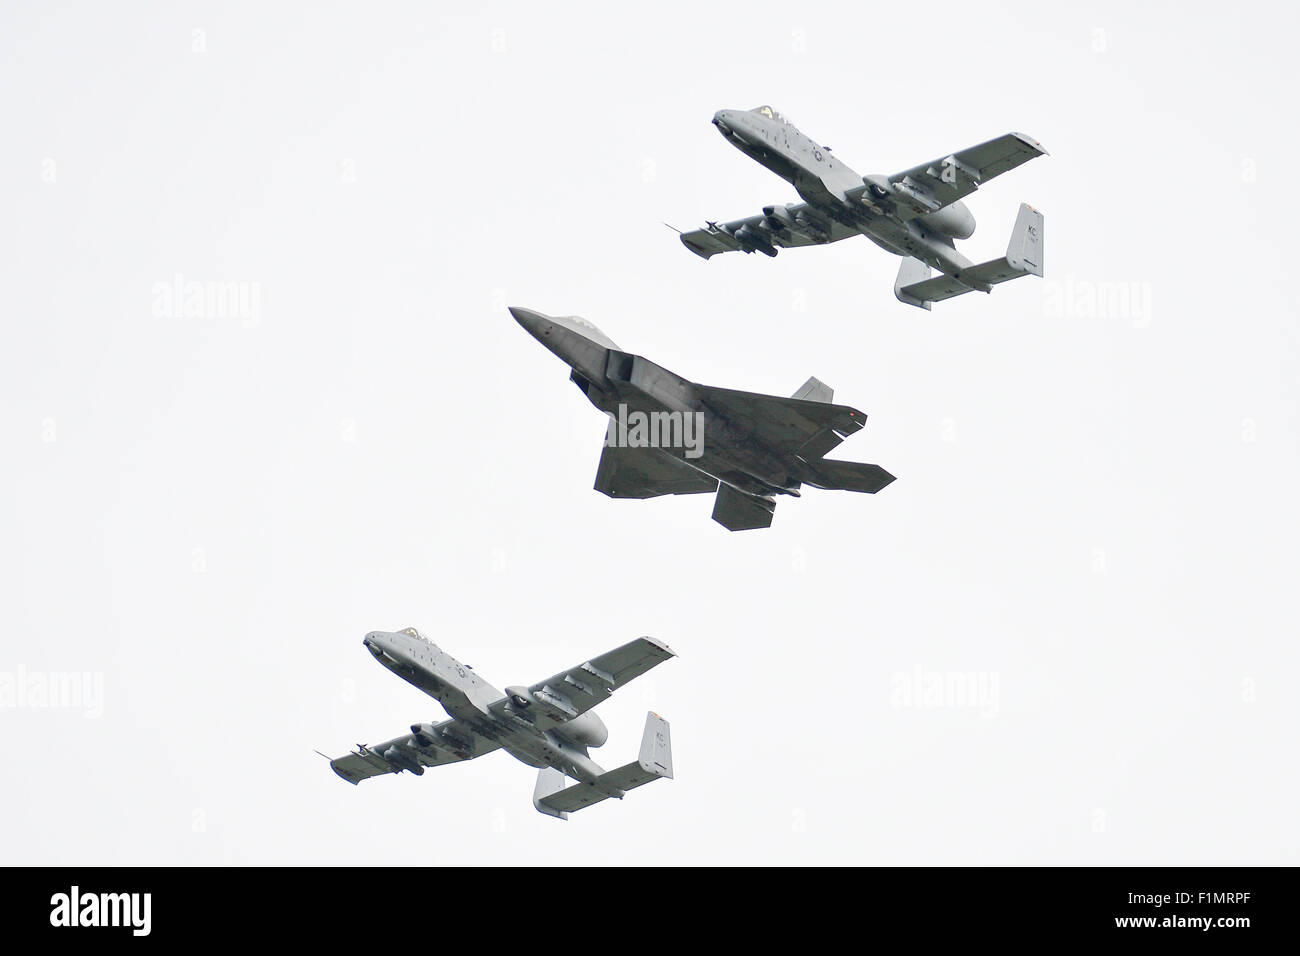 Amari. 4th Sep, 2015. Two A-10 and one F-22 aircrafts fly over the Amari airbase in Estonia on Sept. 4, 2015. U.S. Air Forces Europe and Air Forces Africa Public Affairs made trial flights at Amari Air Base, Estonia, a reinforcement of the increased flying operations in the Baltic and Europe, as well as Estonia's ability to support rotational deployments of U.S. Air Force aircraft. Credit:  Sergei Stepanov/Xinhua/Alamy Live News Stock Photo